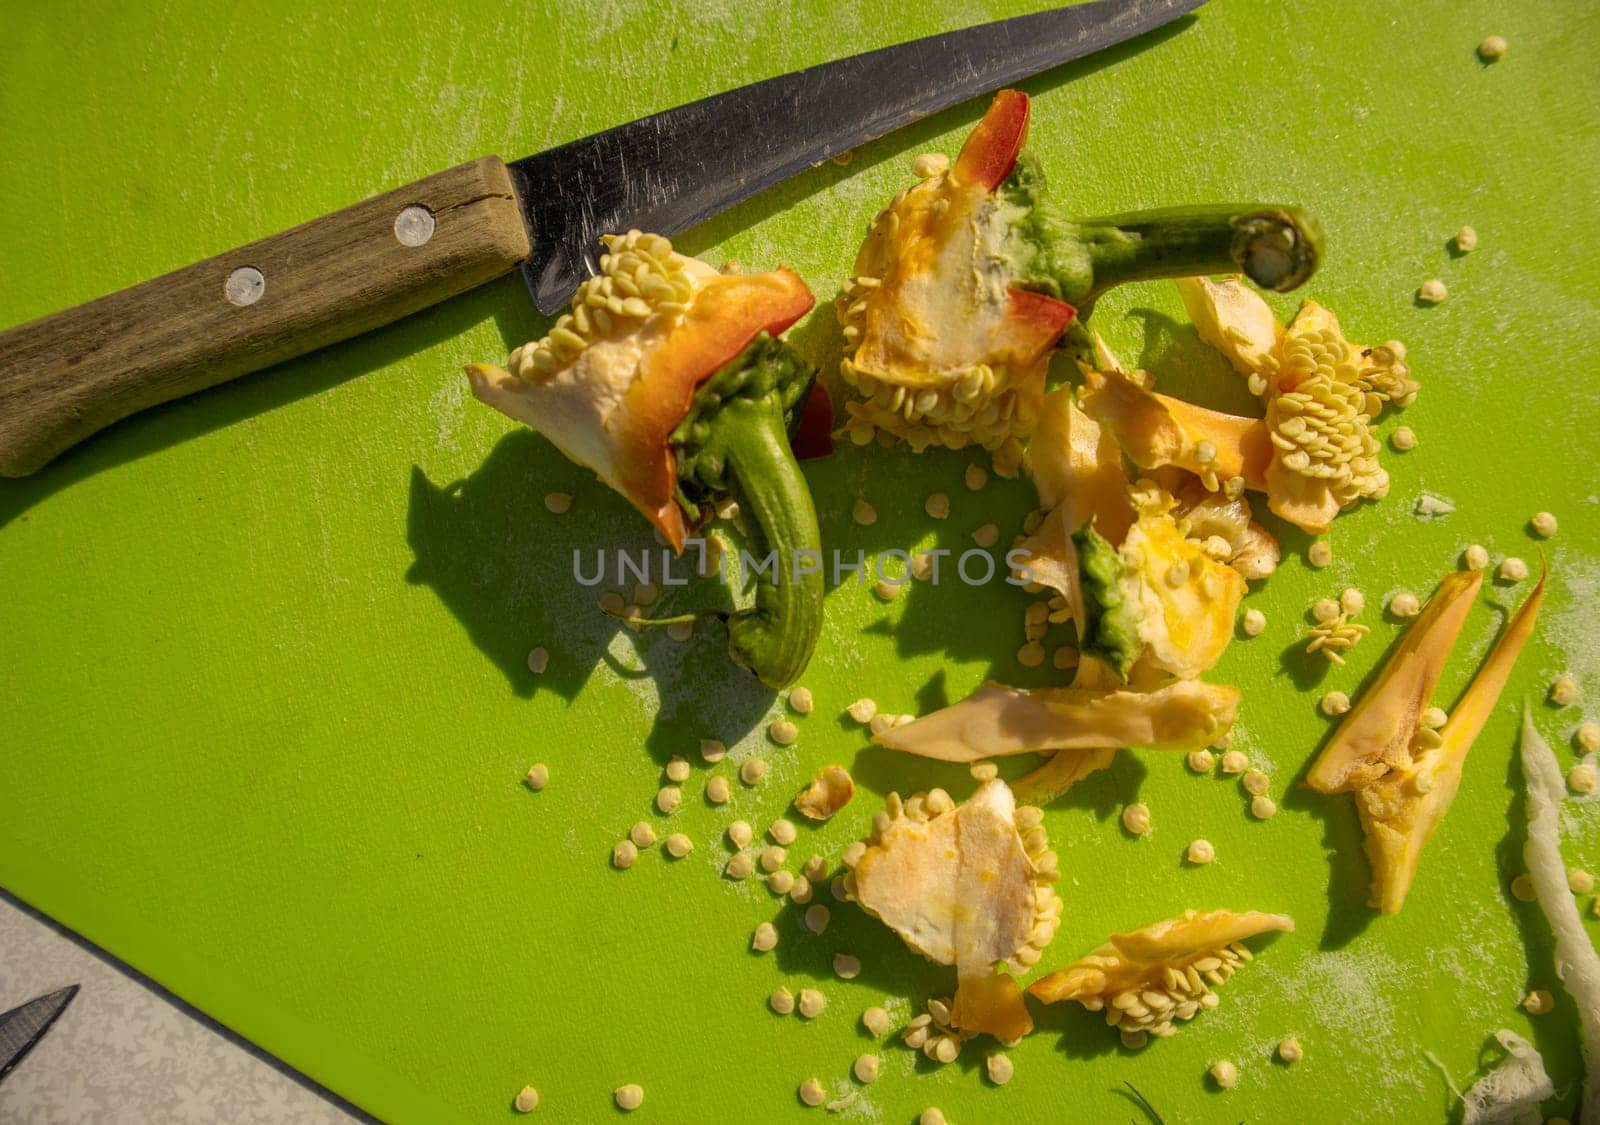 Cooking and cutting sweet peppers, close-up knife, seeds, peel on a green cutting board, top view.